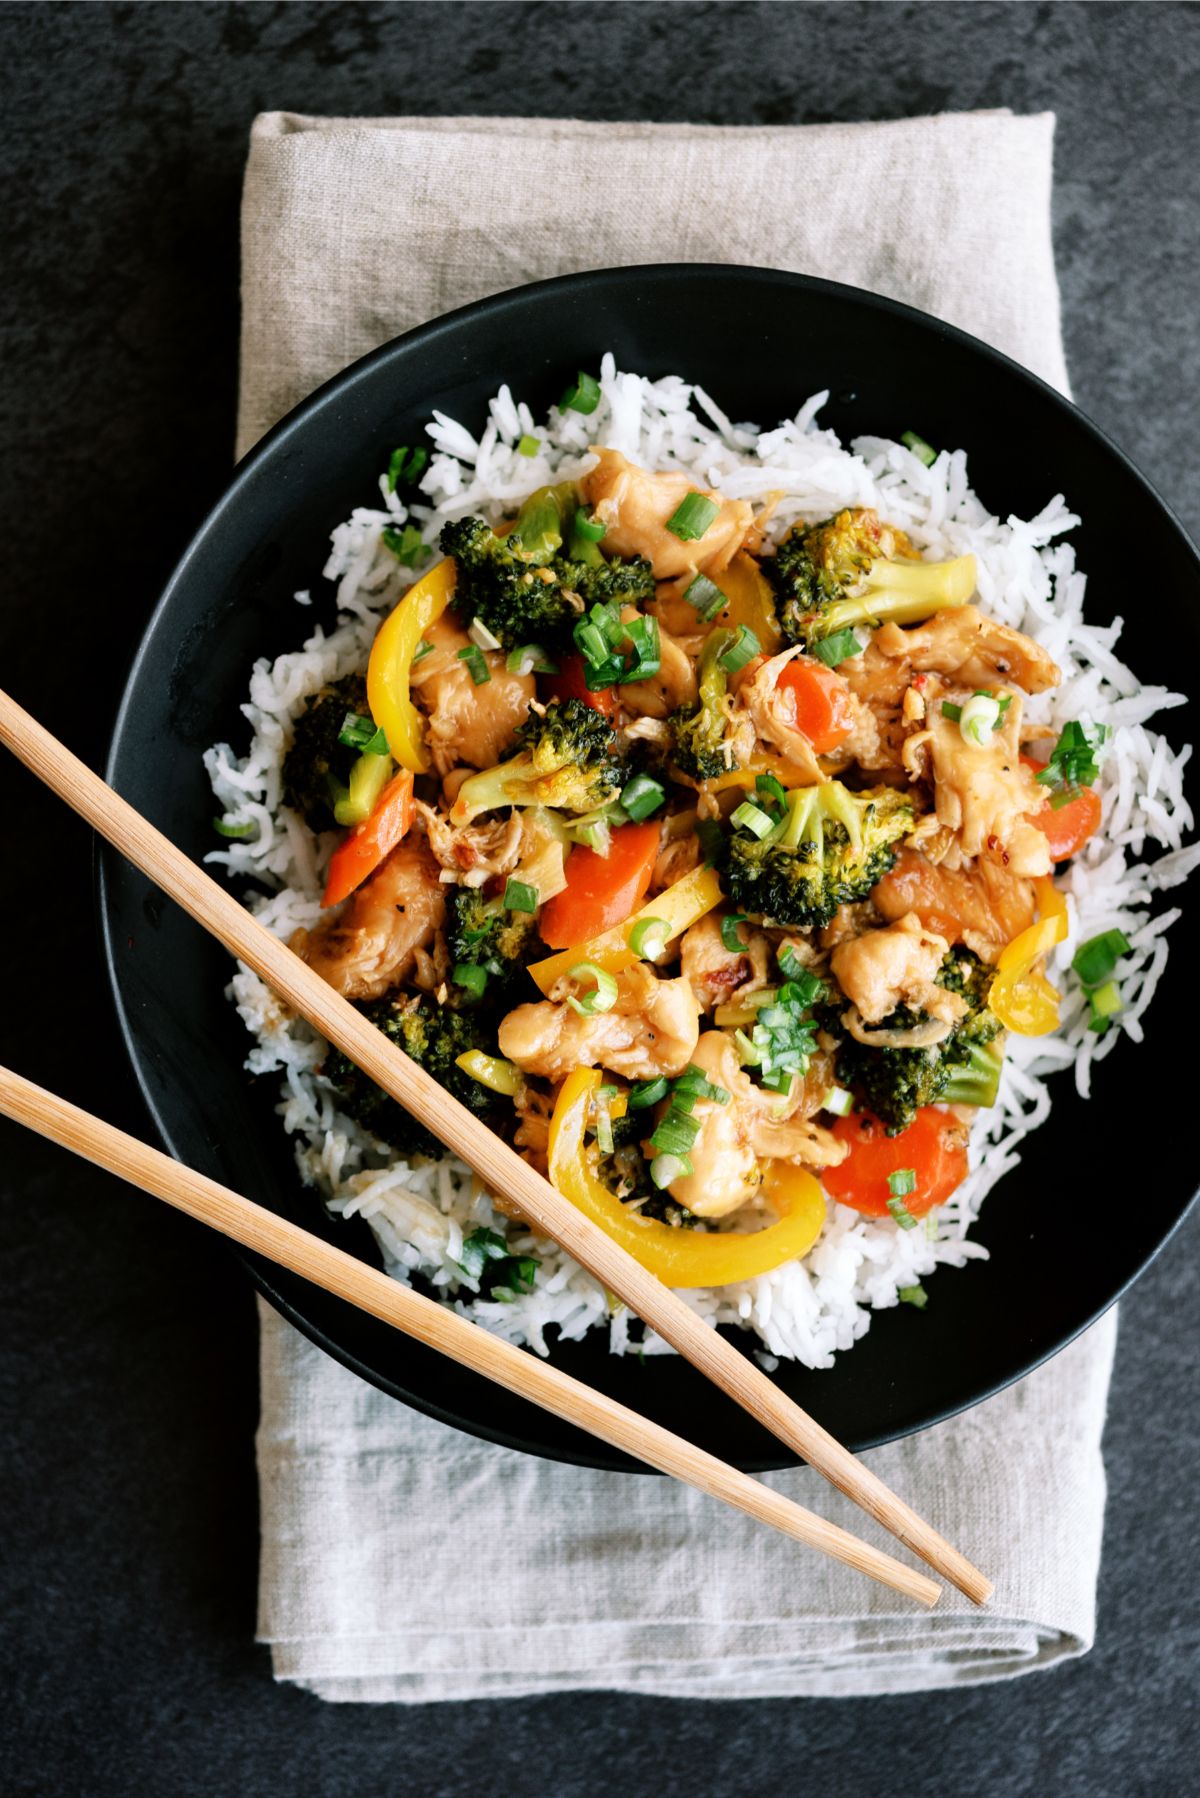 Top view of Instant Pot Chicken and Veggie Stir Fry served over rice with chopsticks